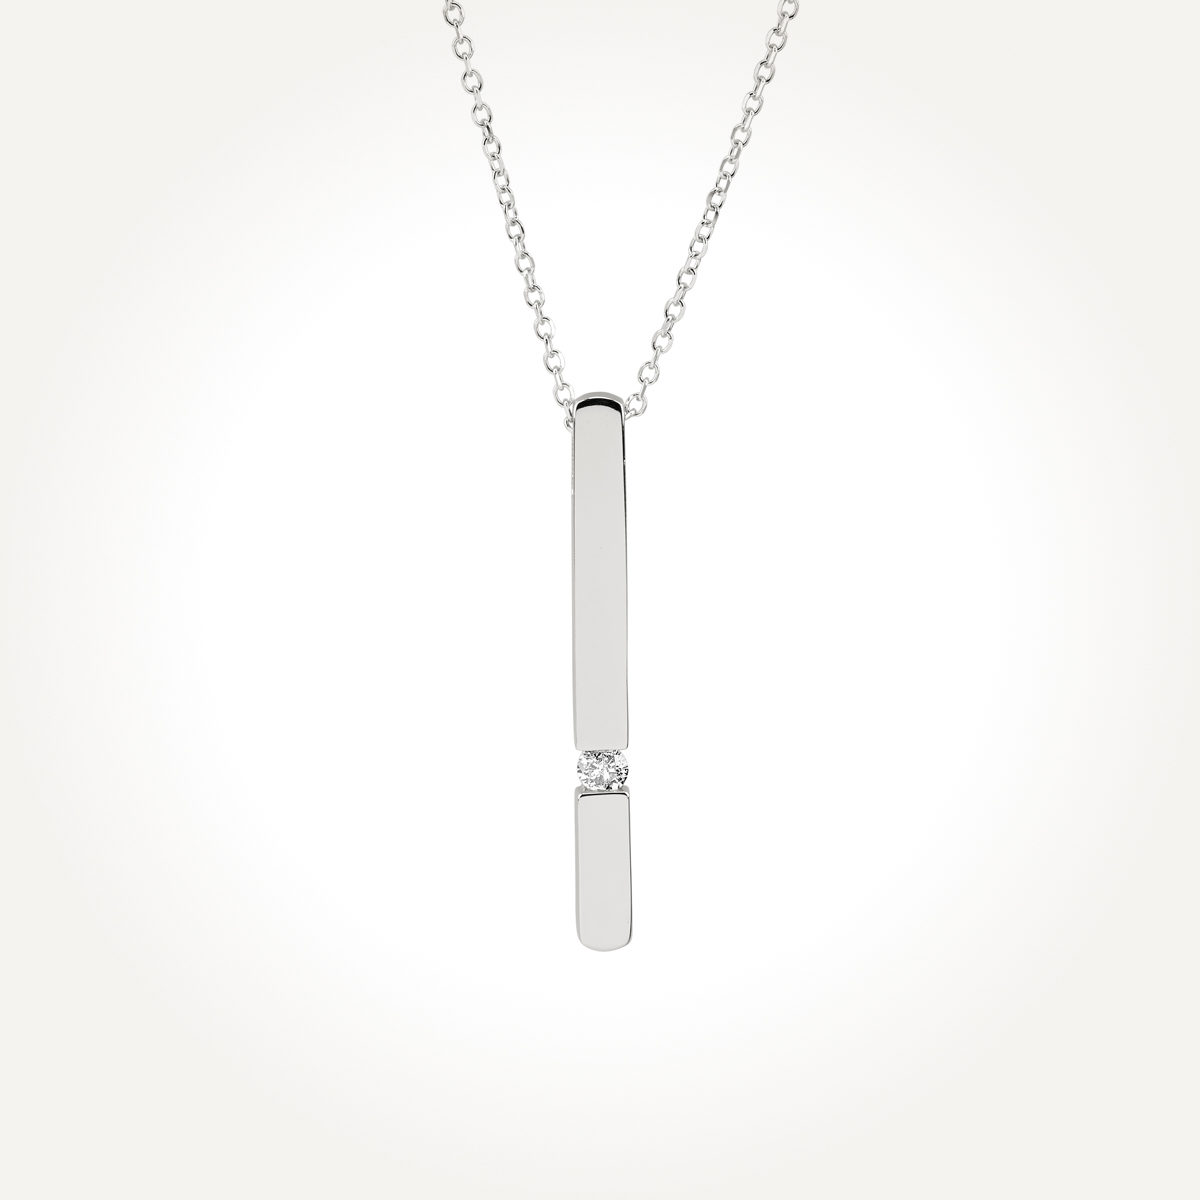 14KT White Gold Solitaire Vertical Bar Pendant 0.05 CT. T.W.